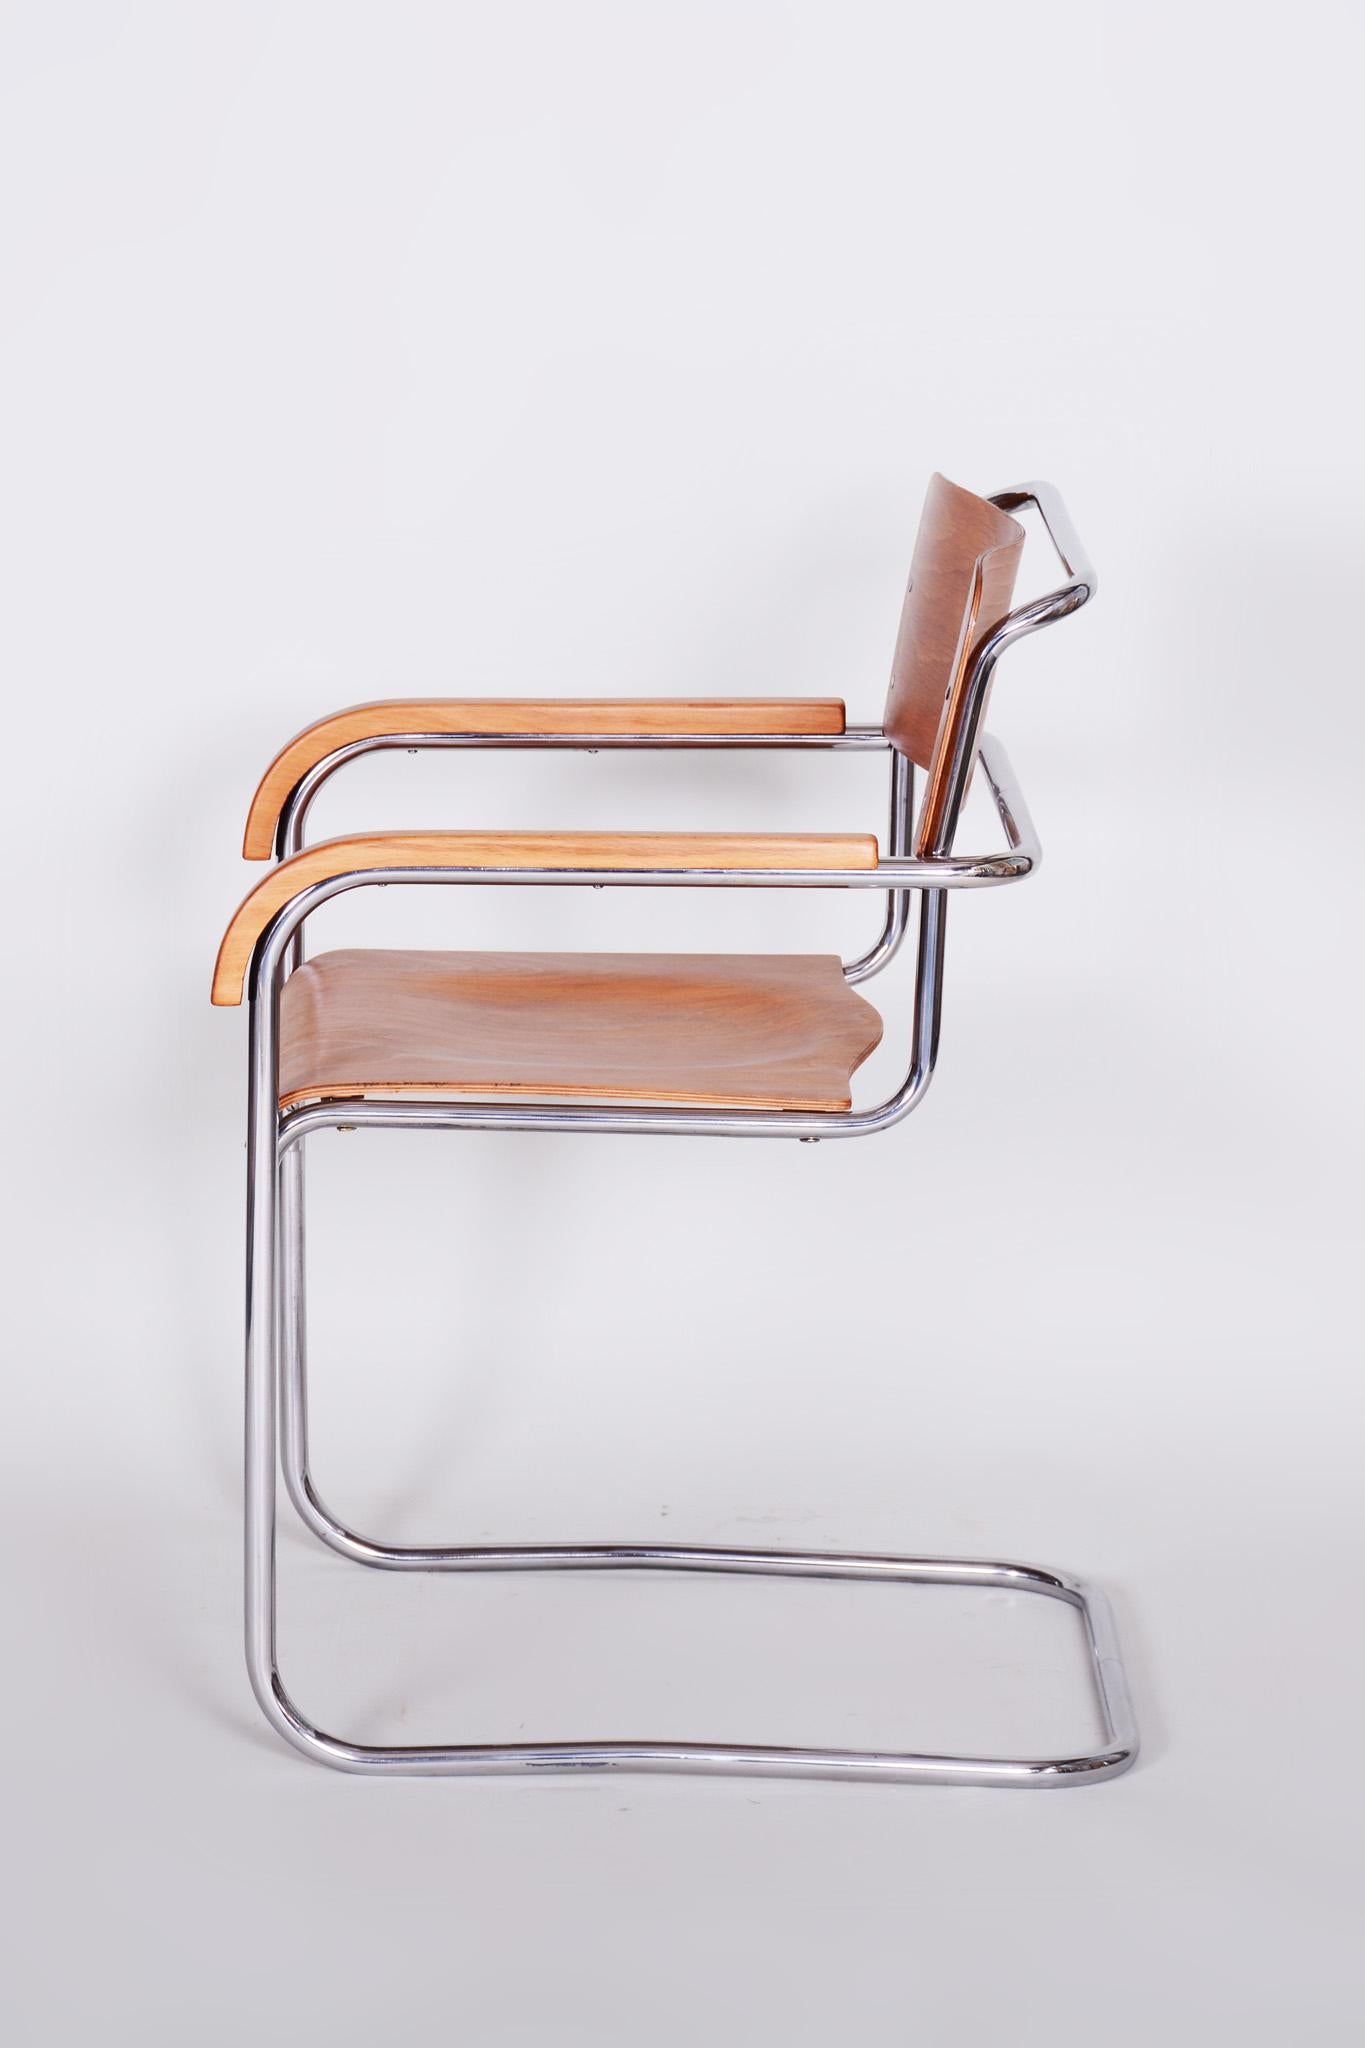 Czech Bauhaus Beech Armchair by Mücke and Melder, Chrome-Plated Steel, 1930s In Good Condition For Sale In Horomerice, CZ